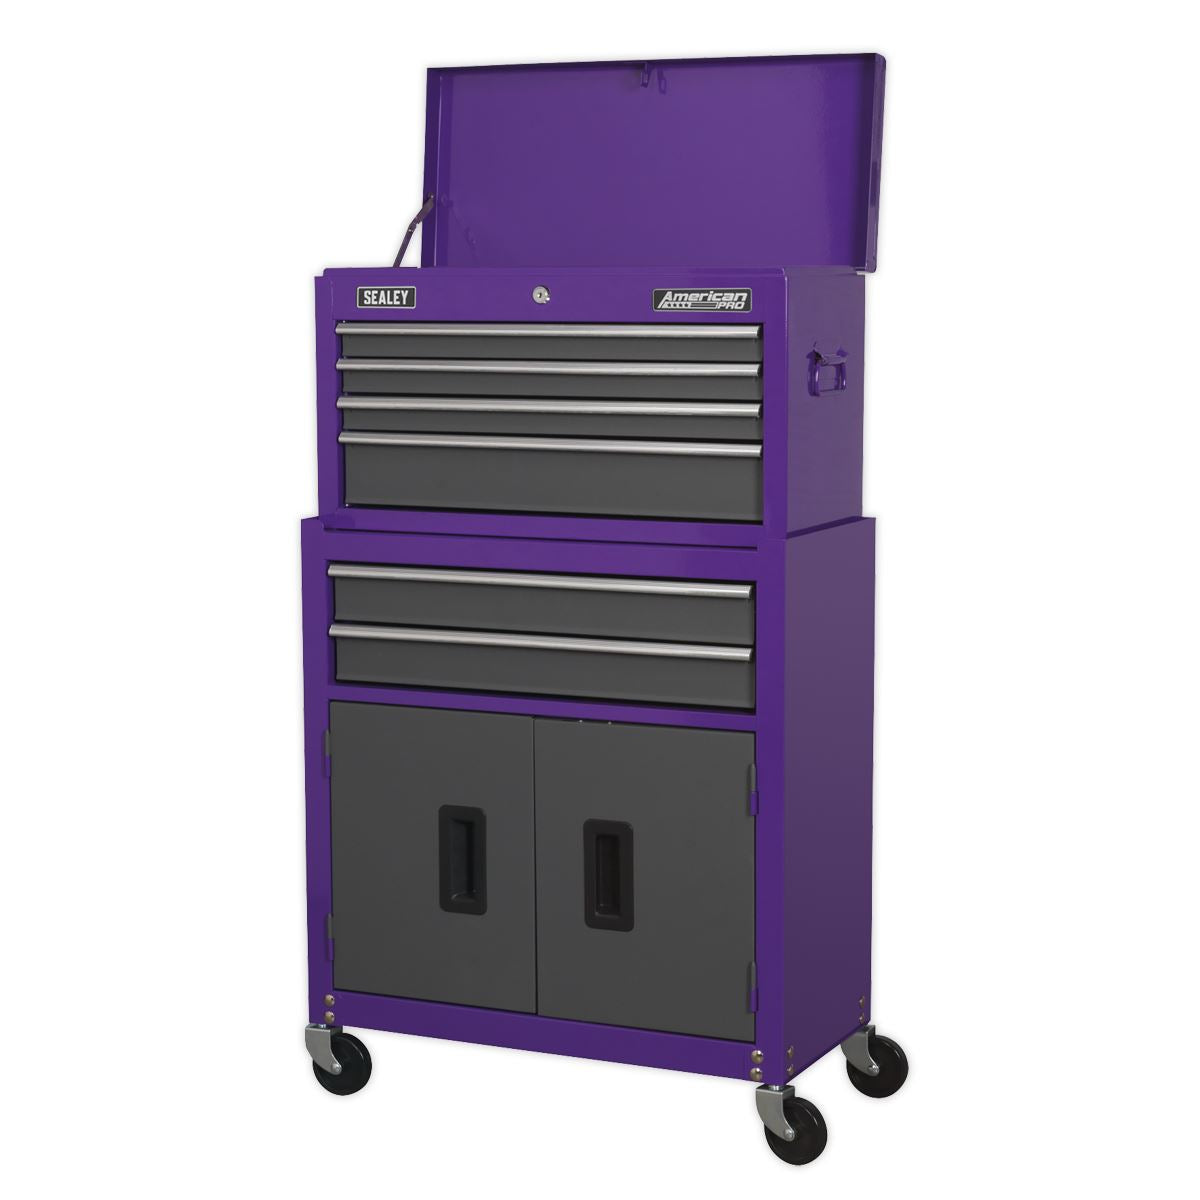 Sealey American Pro Topchest & Rollcab Combination 6 Drawer with Ball-Bearing Slides - Purple/Grey